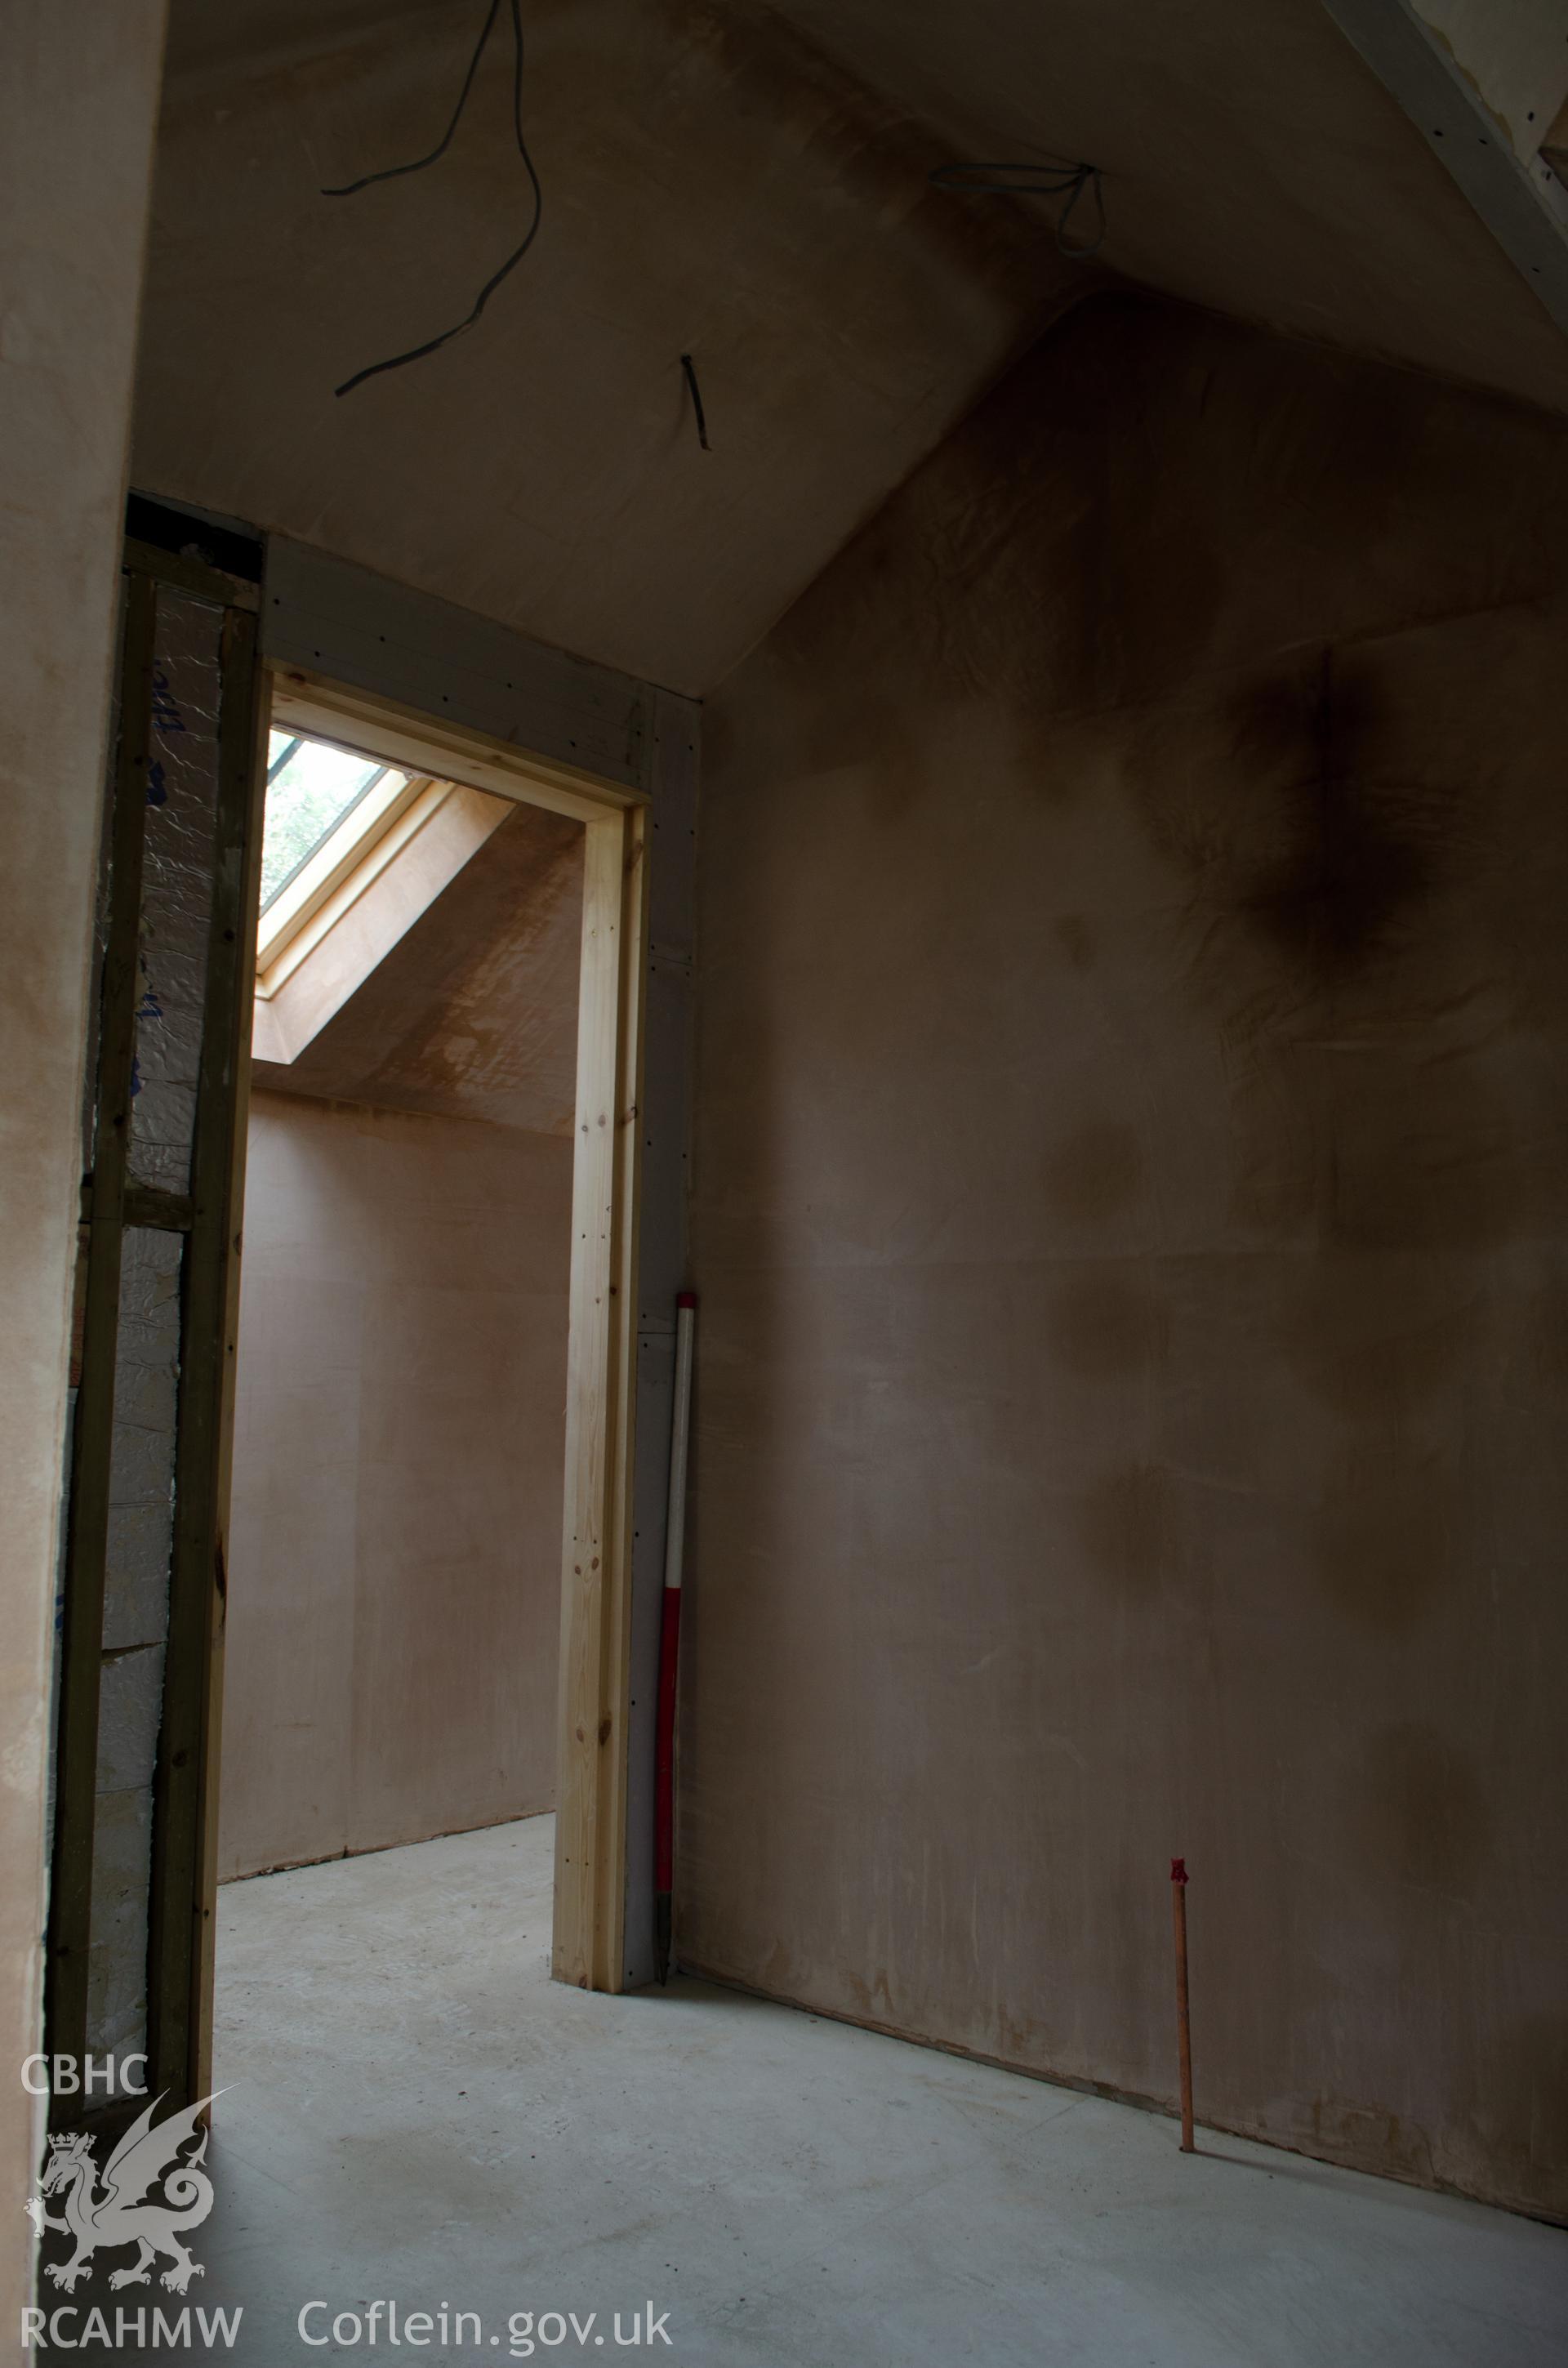 View from the south-west showing doorway into proposed main bathroom.